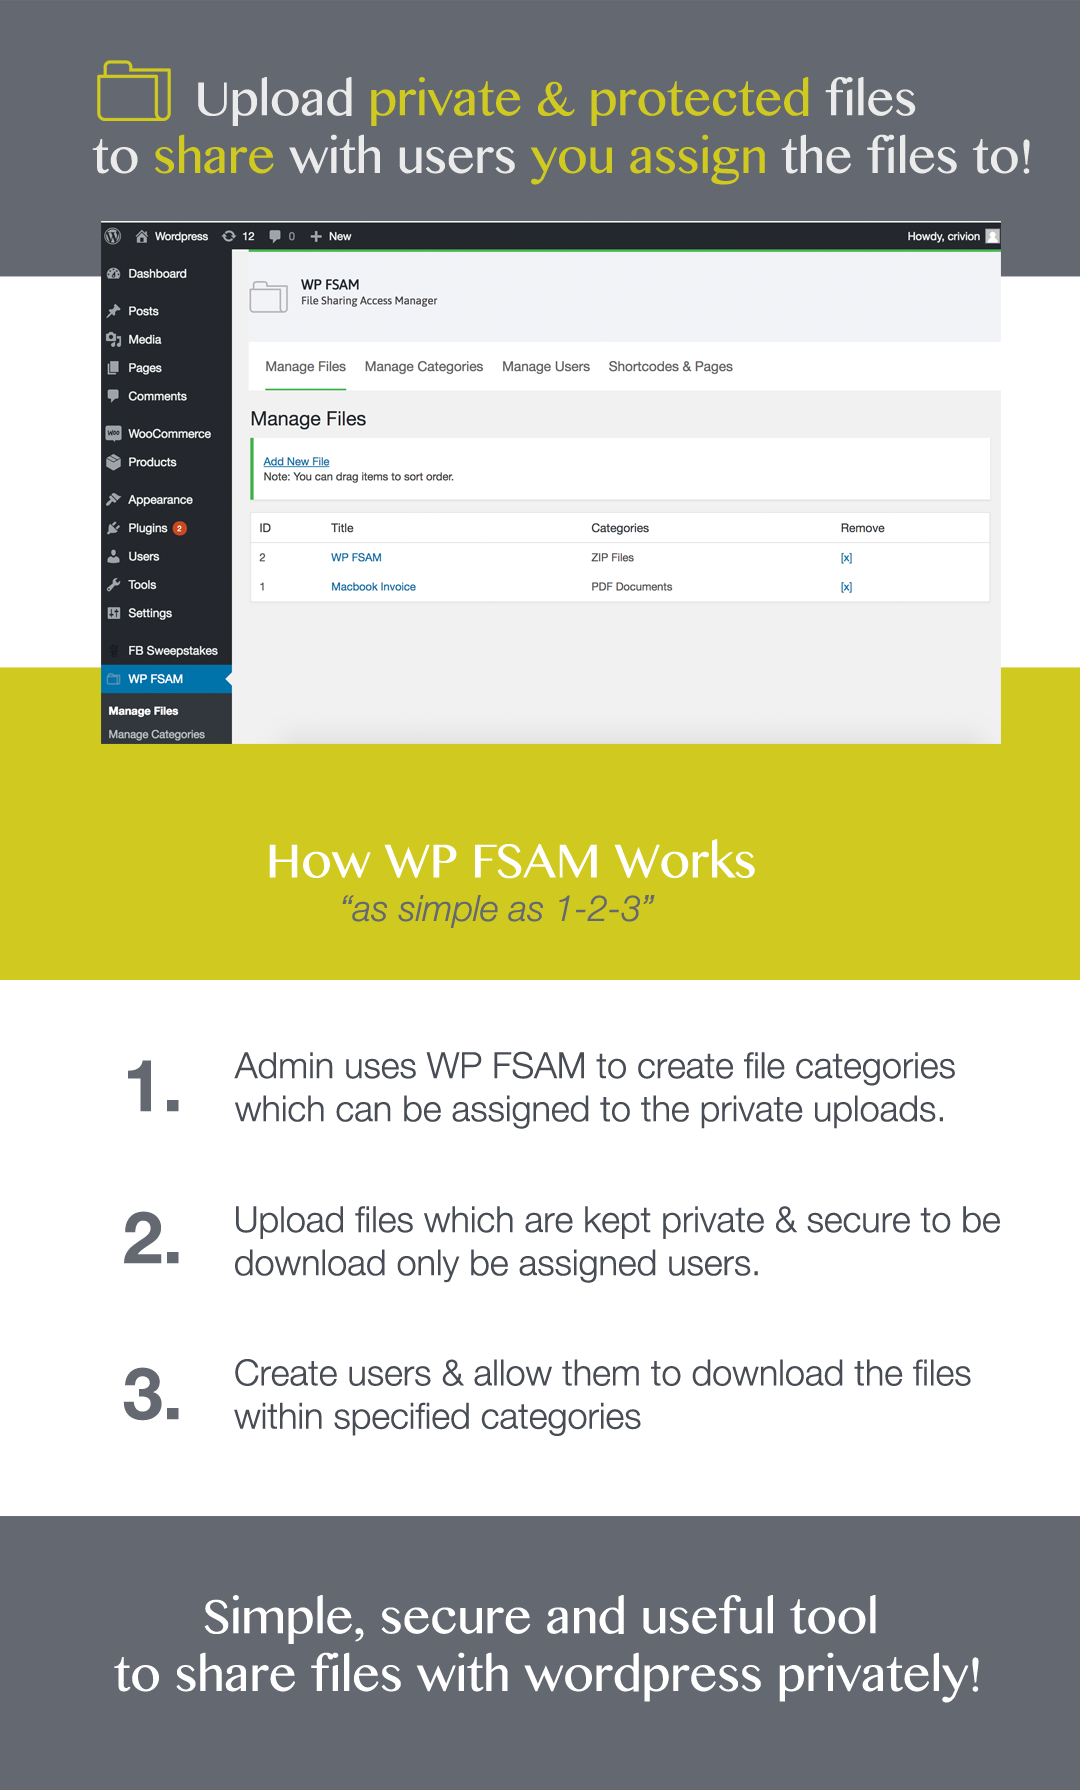 wp file sharing access manager description